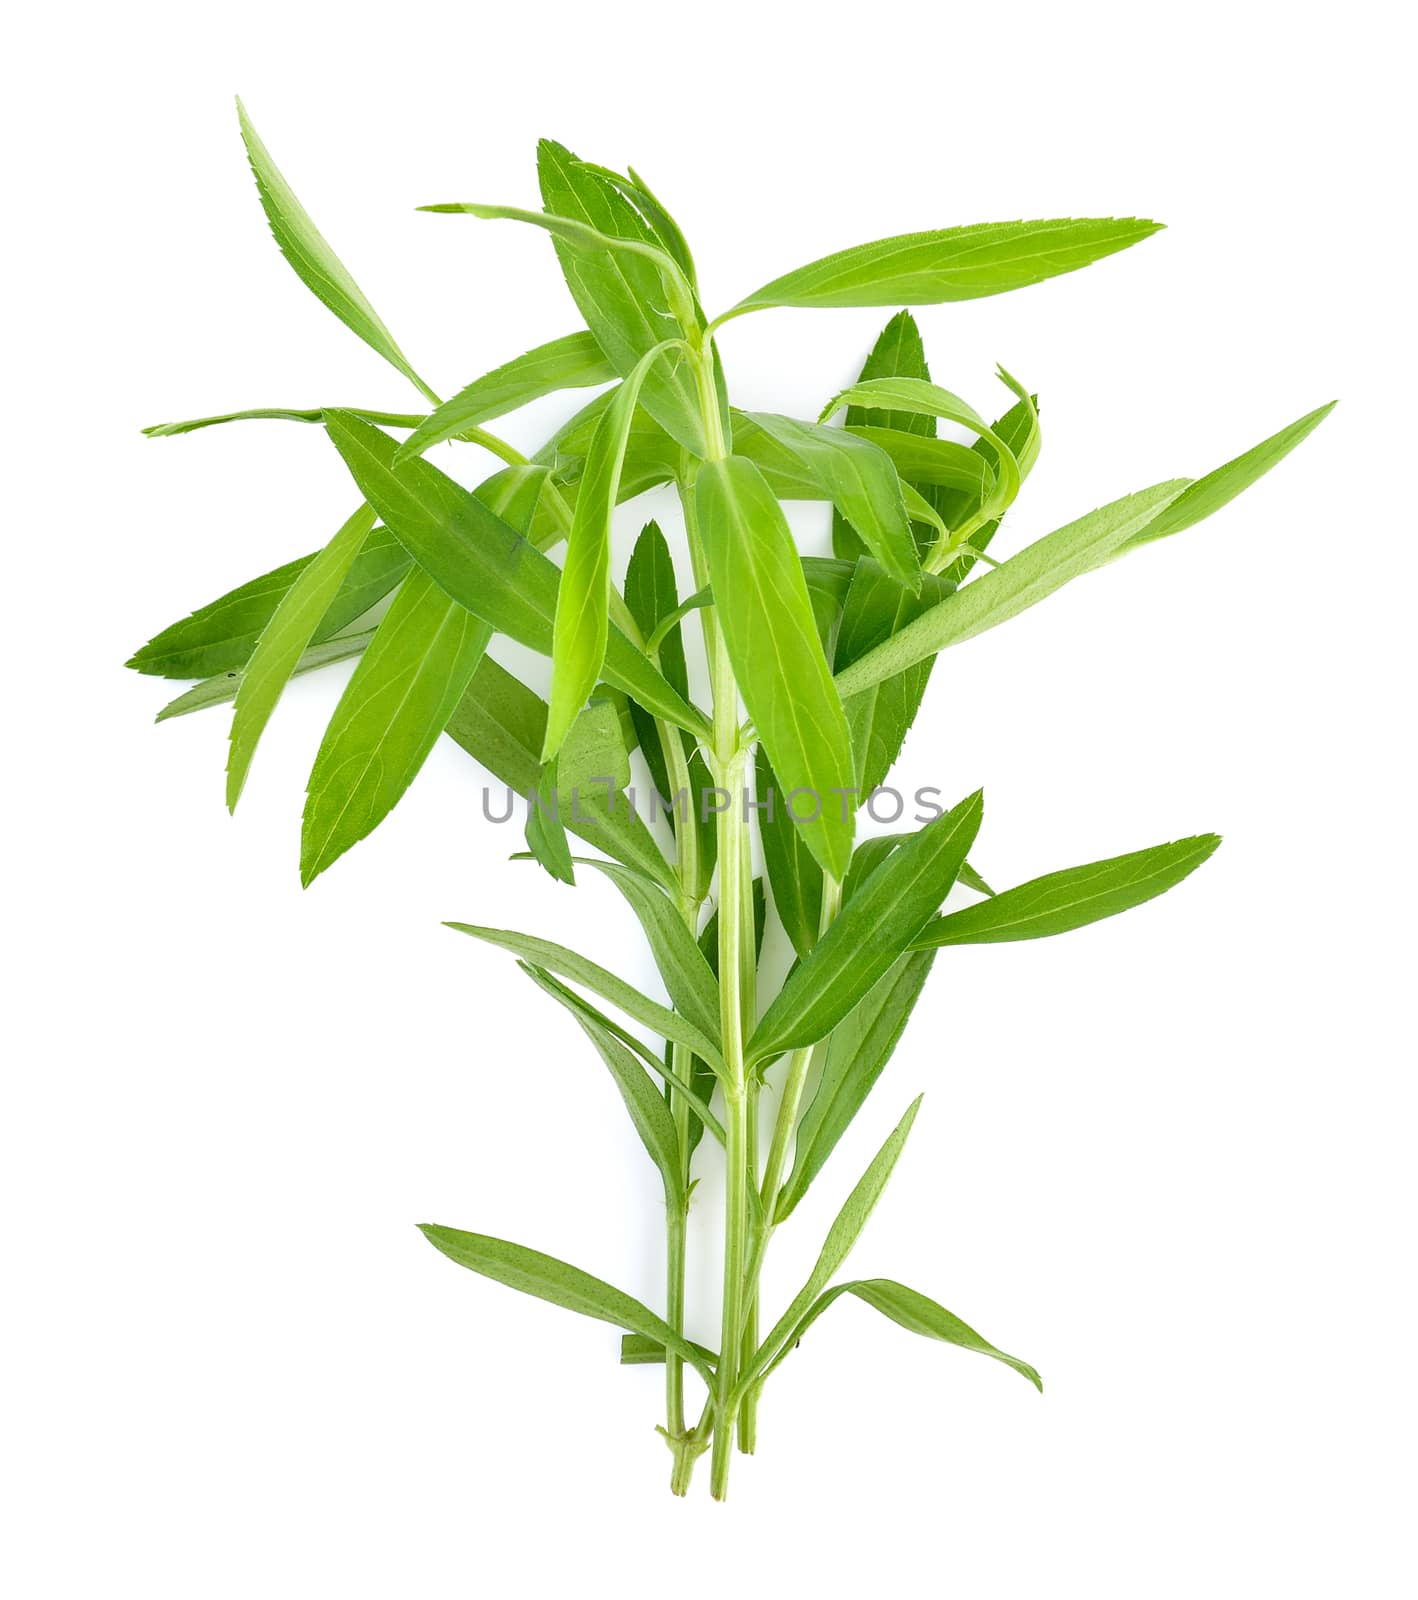 Tarragon herbs on white background by sommai